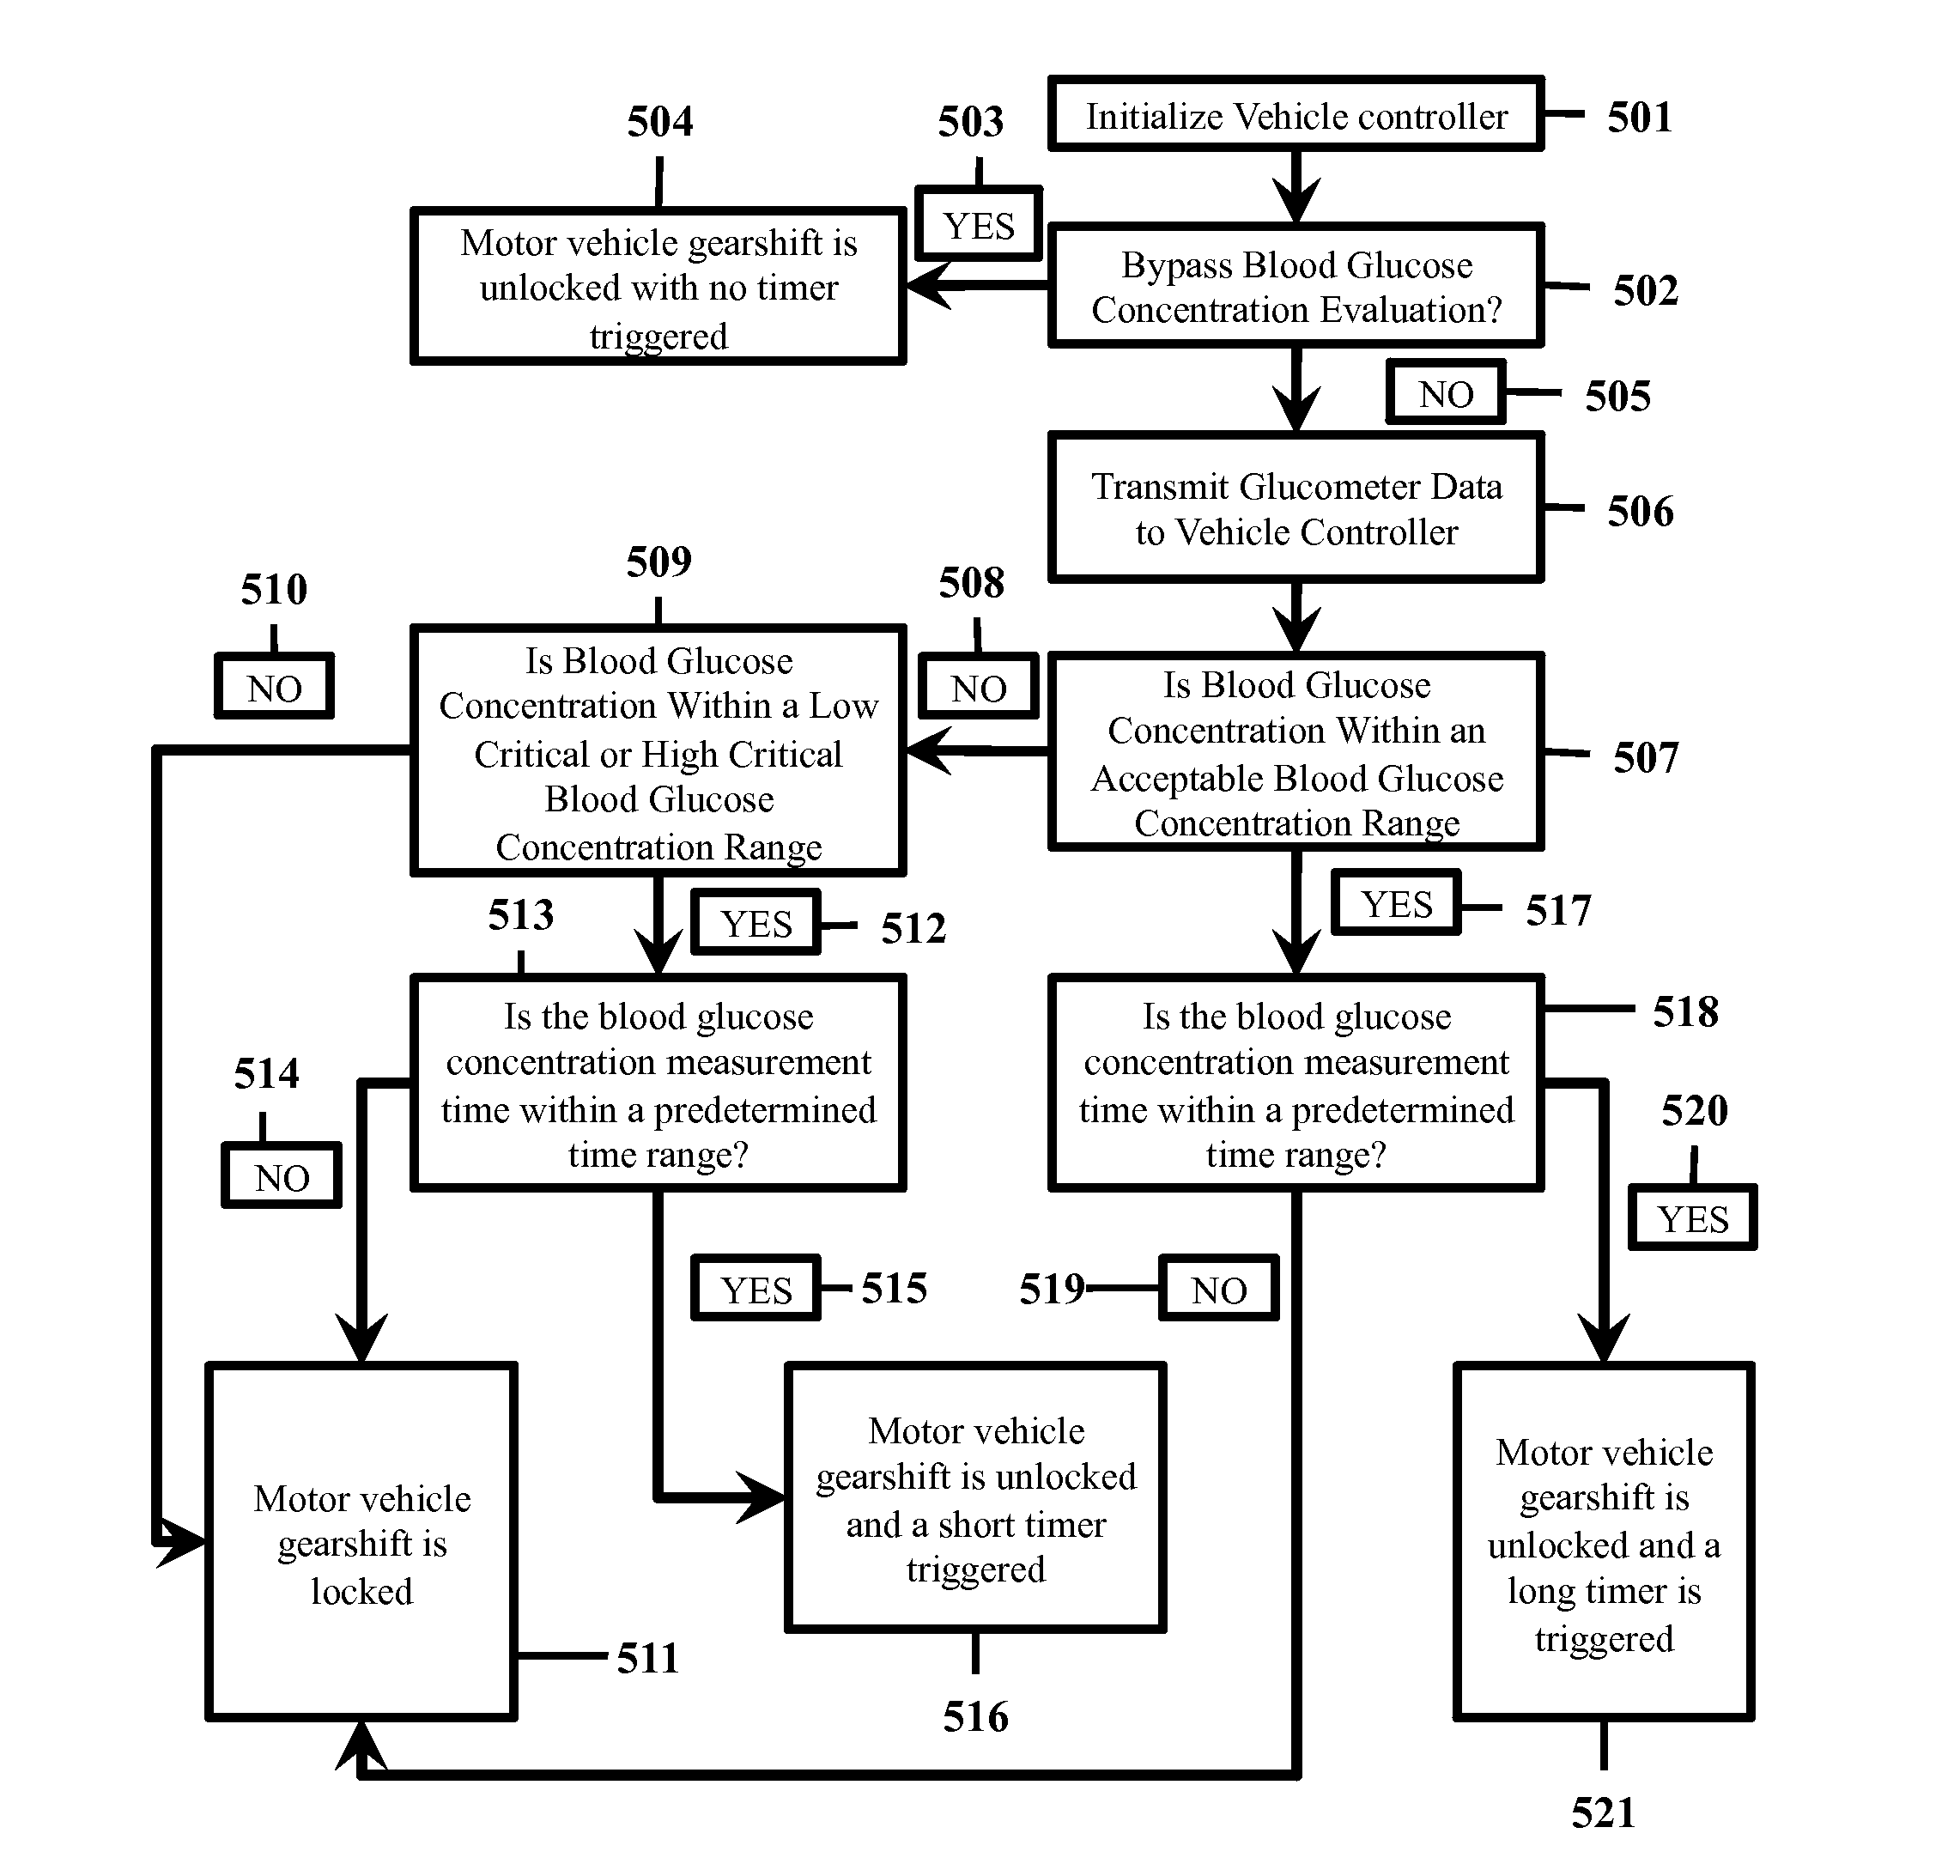 In vehicle glucose apparatus and vehicular operation inhibitor